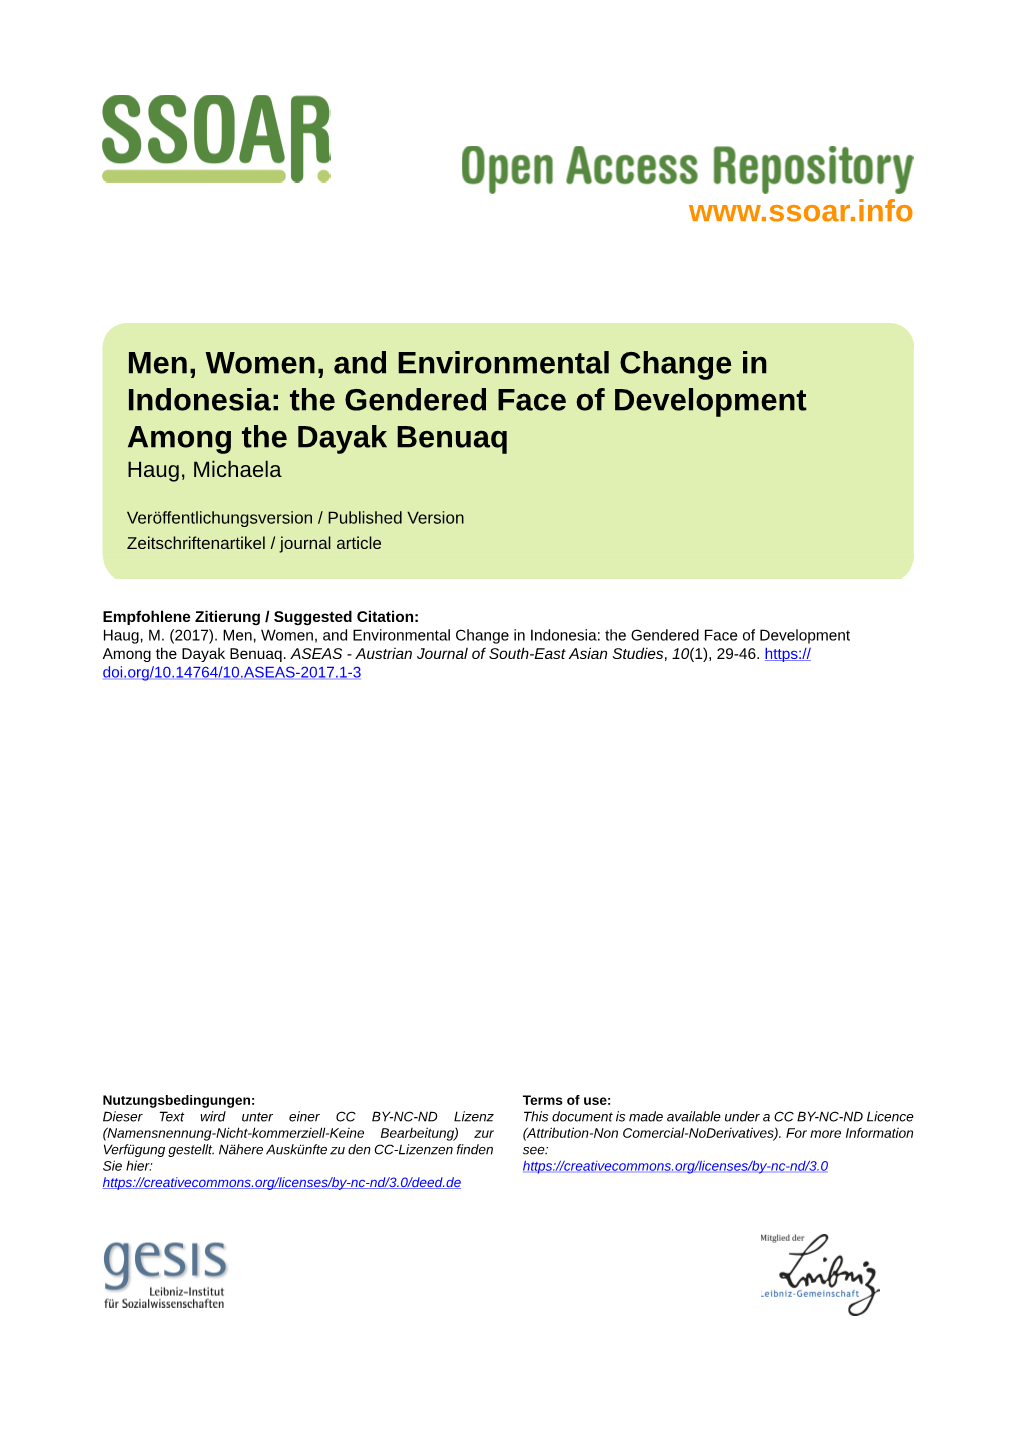 Men, Women, and Environmental Change in Indonesia: the Gendered Face of Development Among the Dayak Benuaq Haug, Michaela